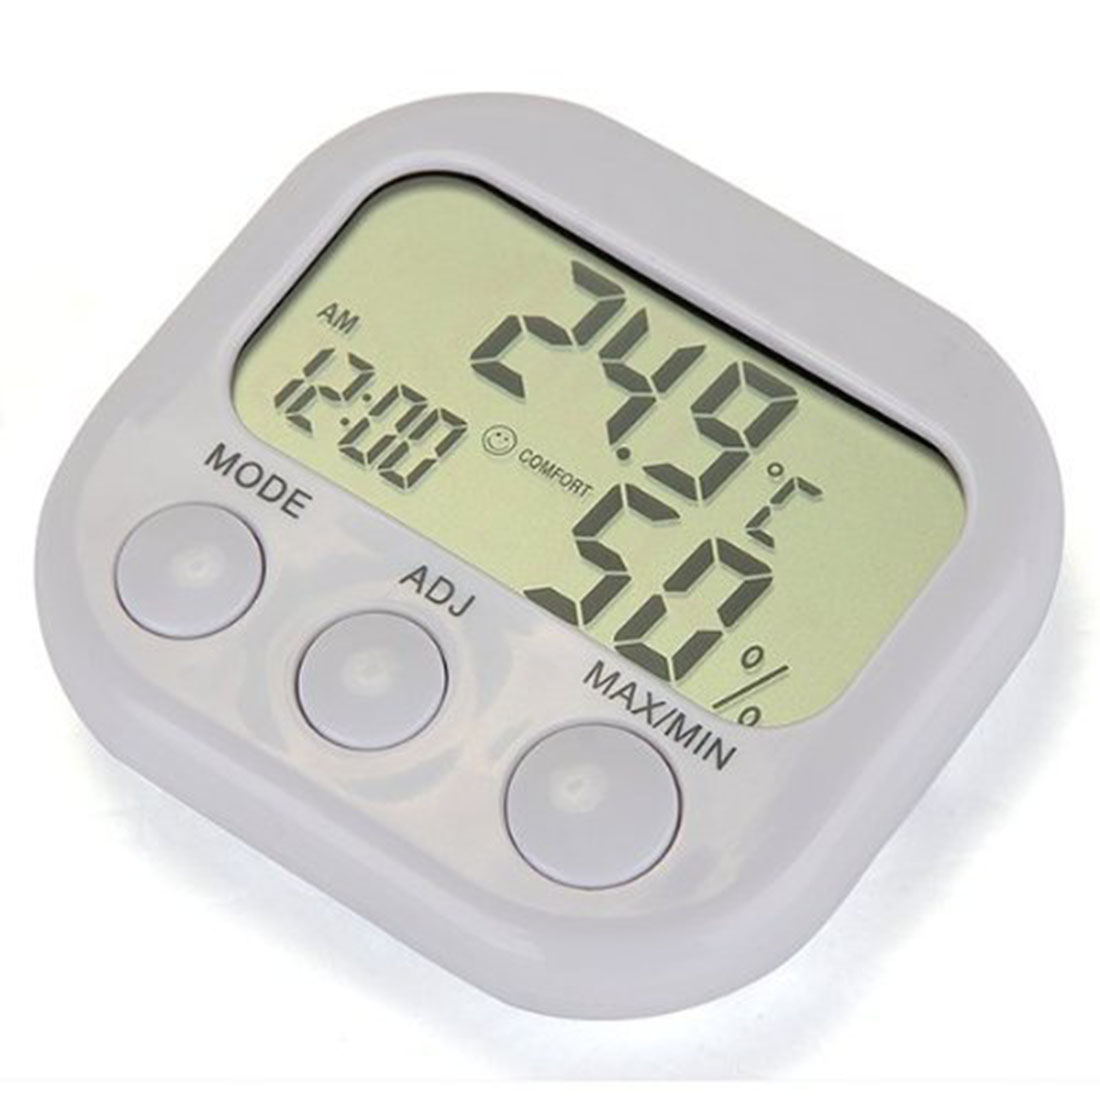 Image of New Weather Station LCD Digital Thermometer Hygrometer Temperature Humidity Meter Gauge With Clock